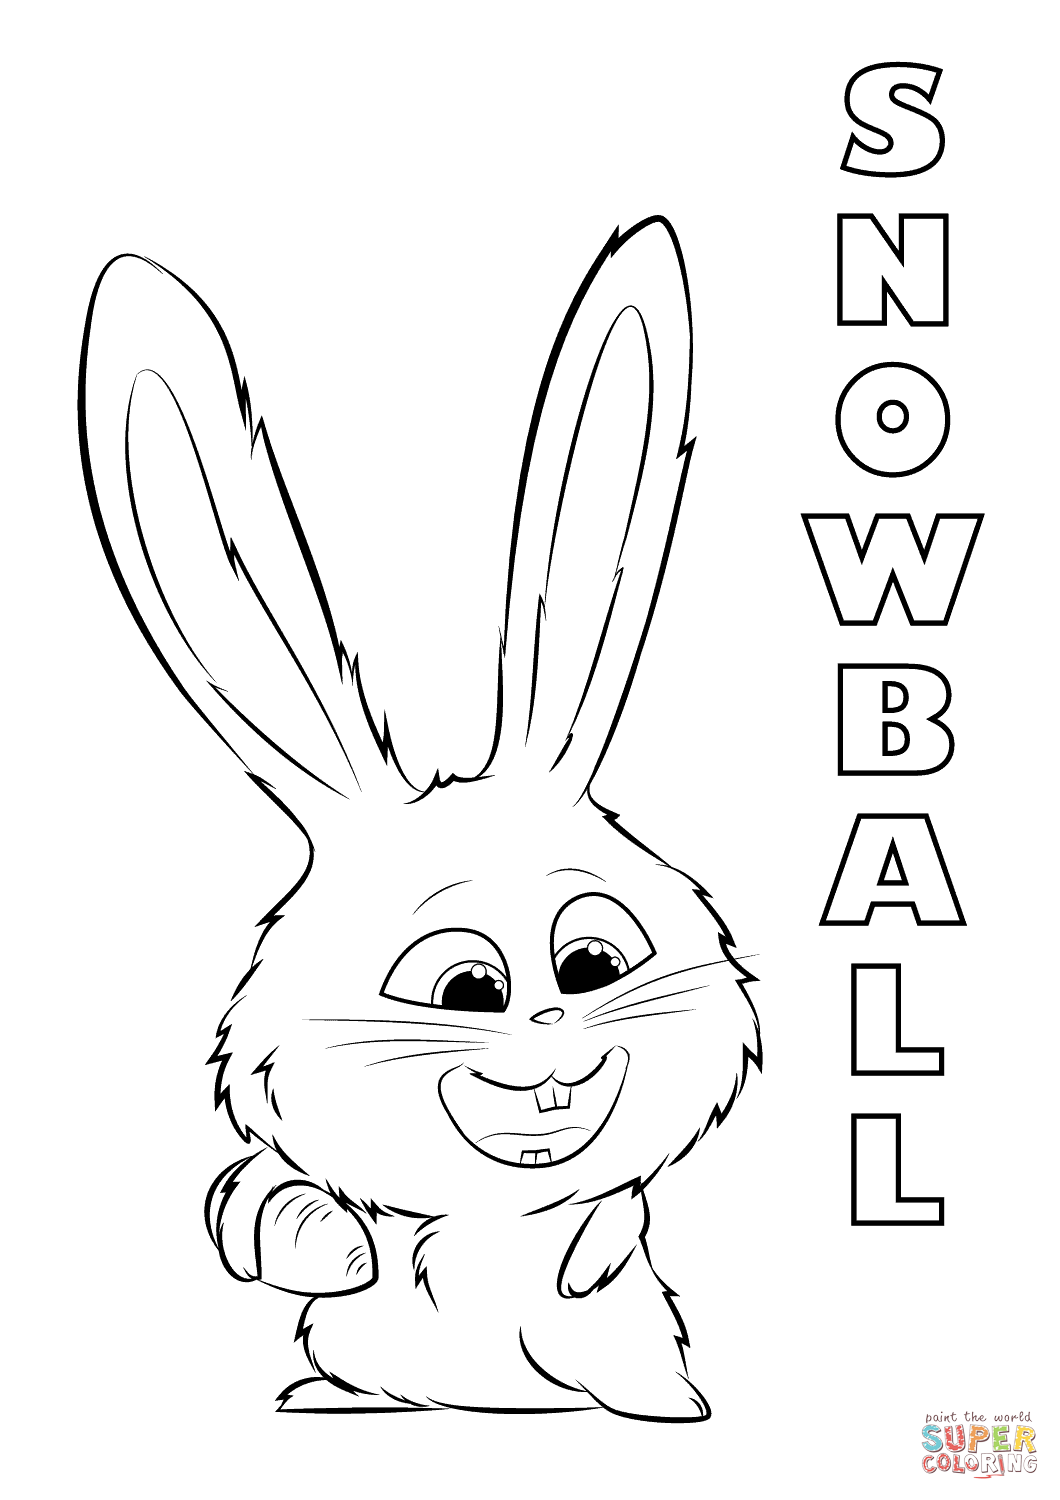 Snowball From The Secret Life Of Pets Coloring Page   Free ...